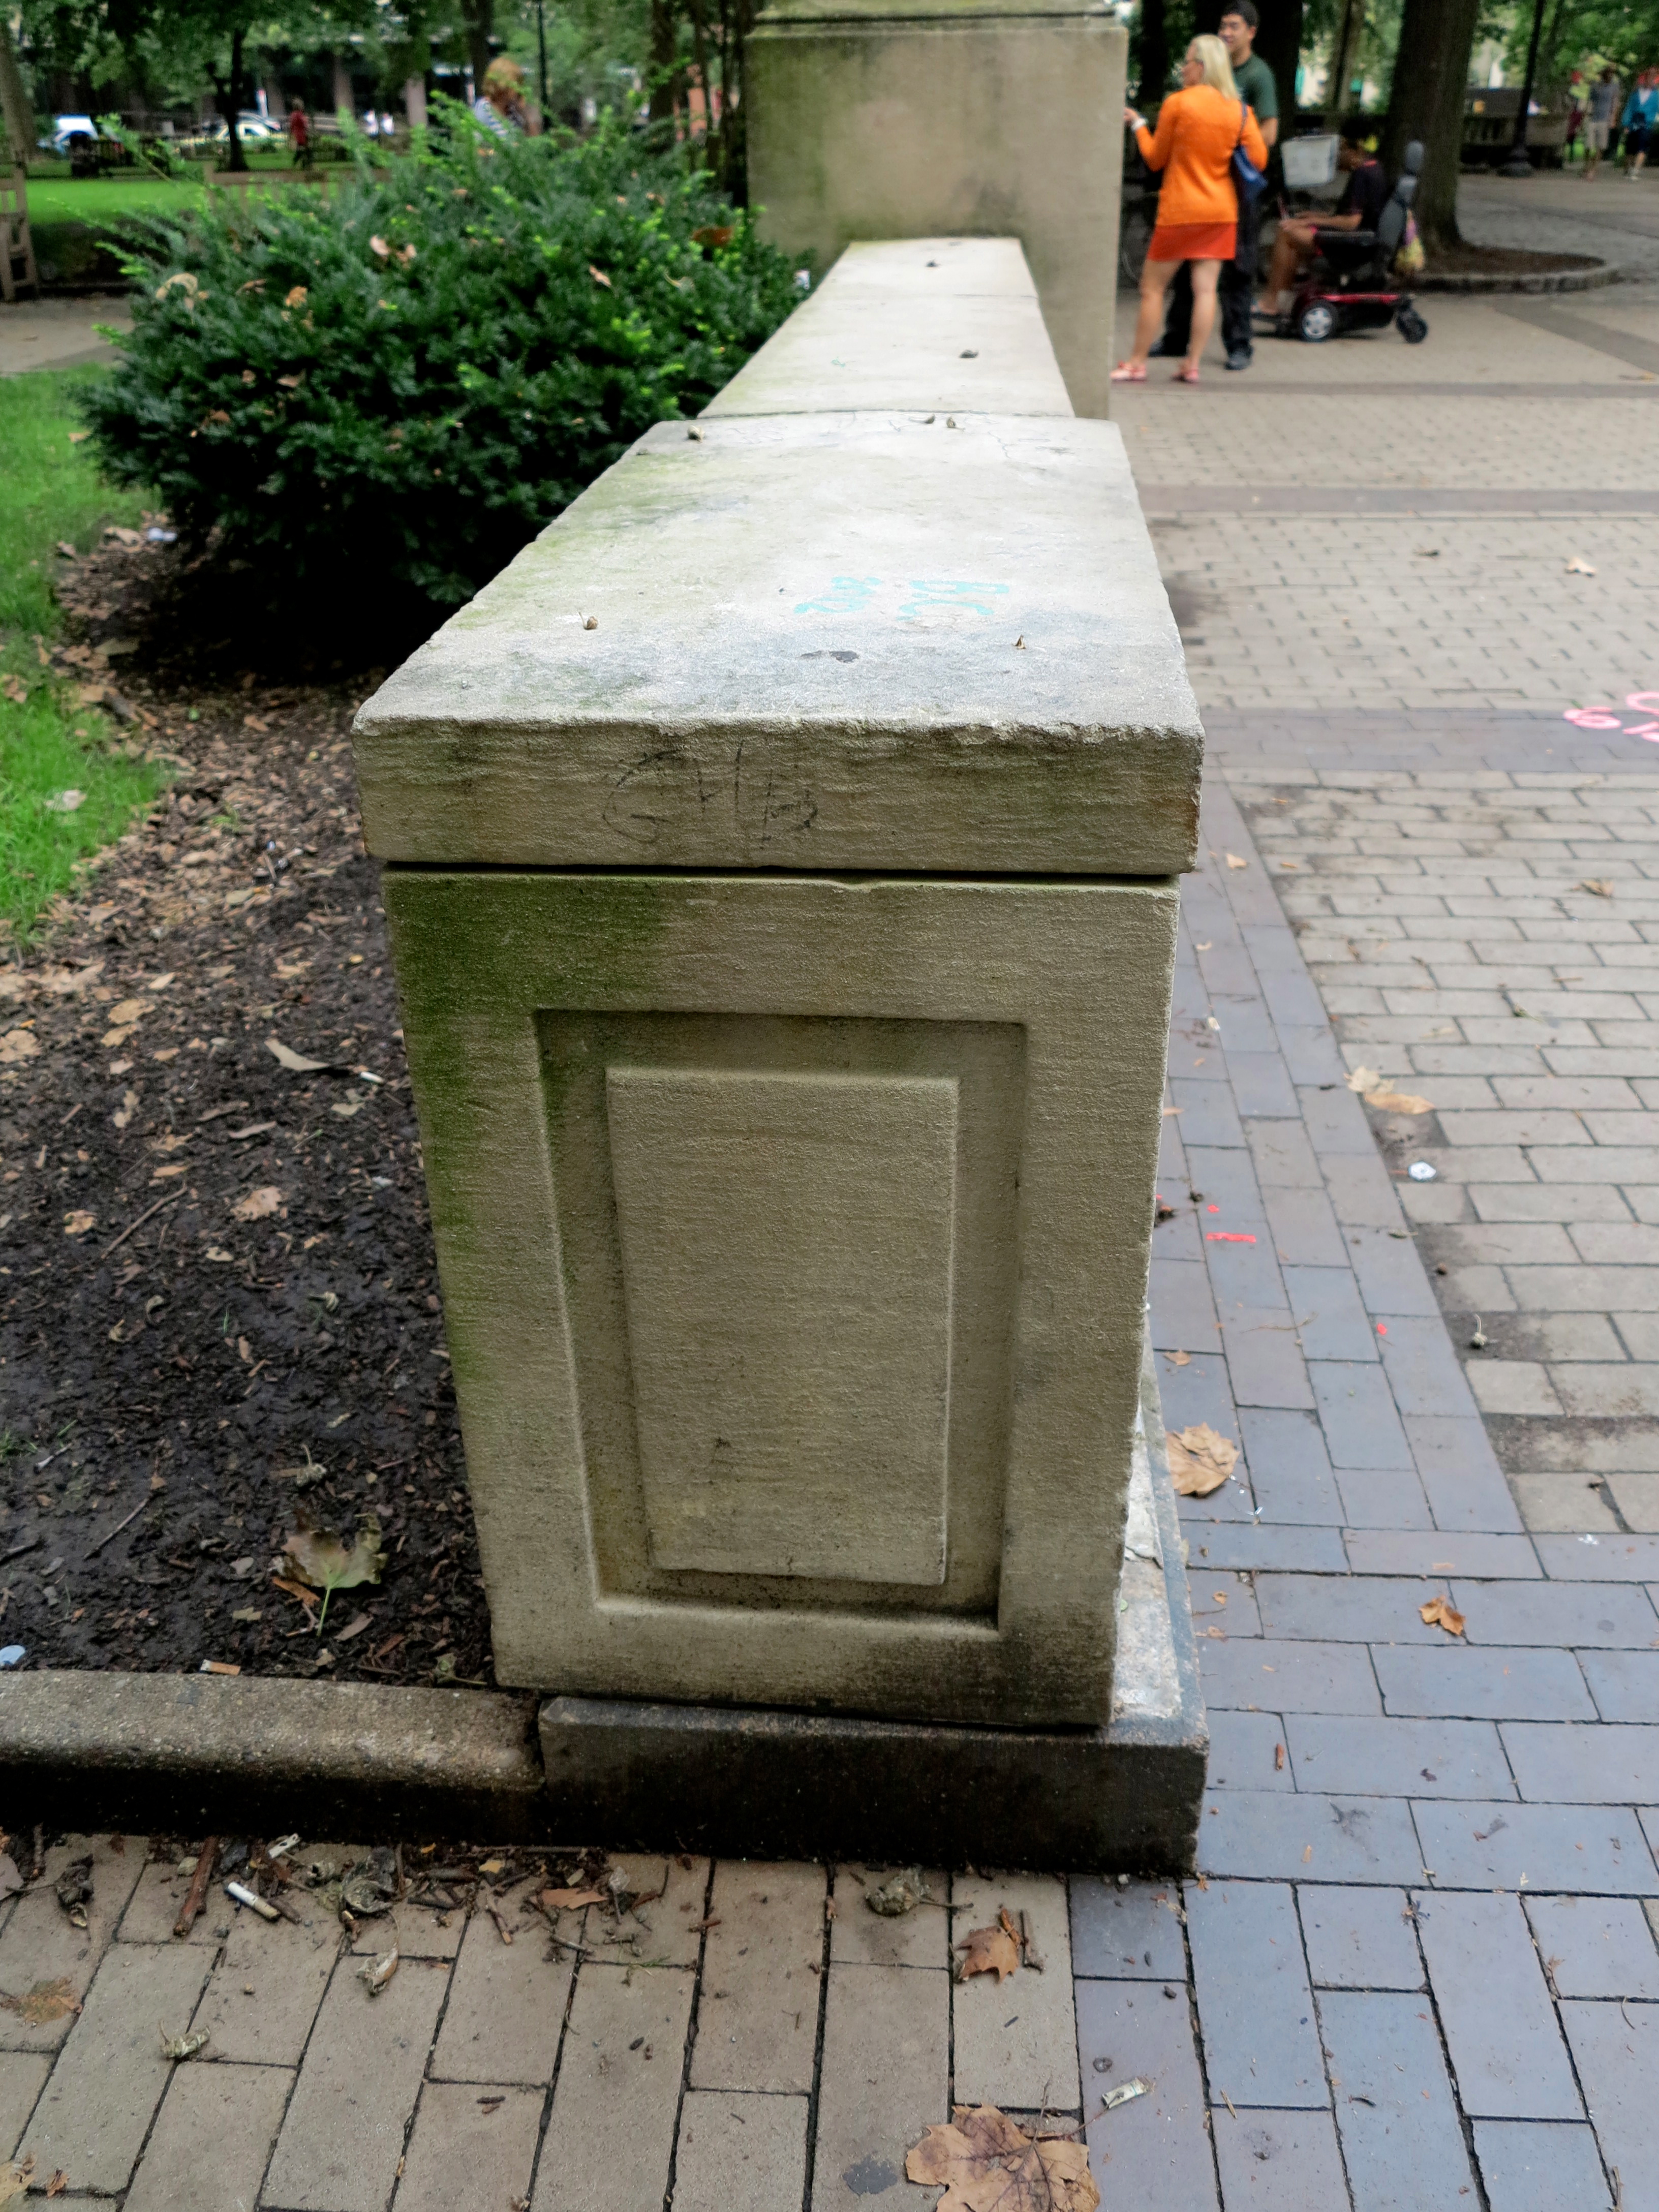 This corner section was knocked off its granite base.